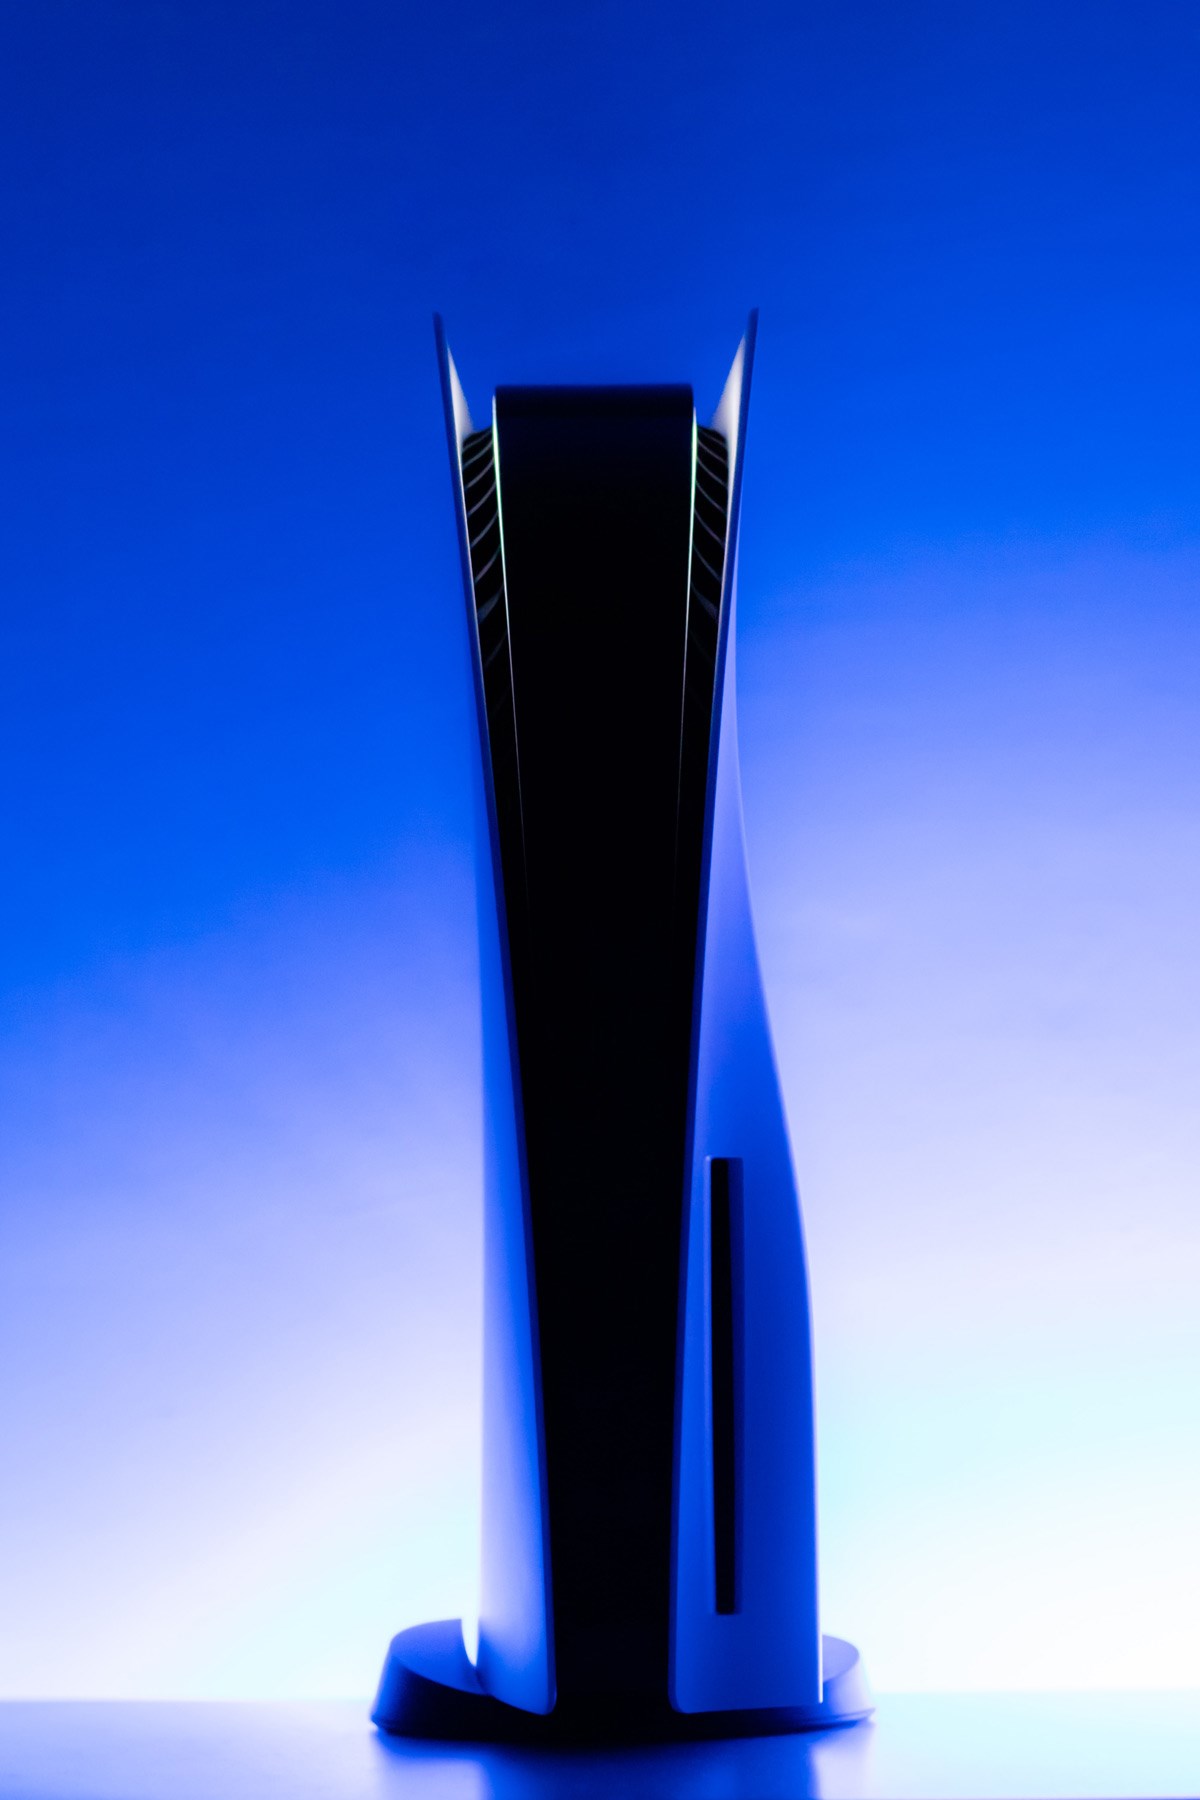 A Playstation 5 console standing vertically, viewed from the front.